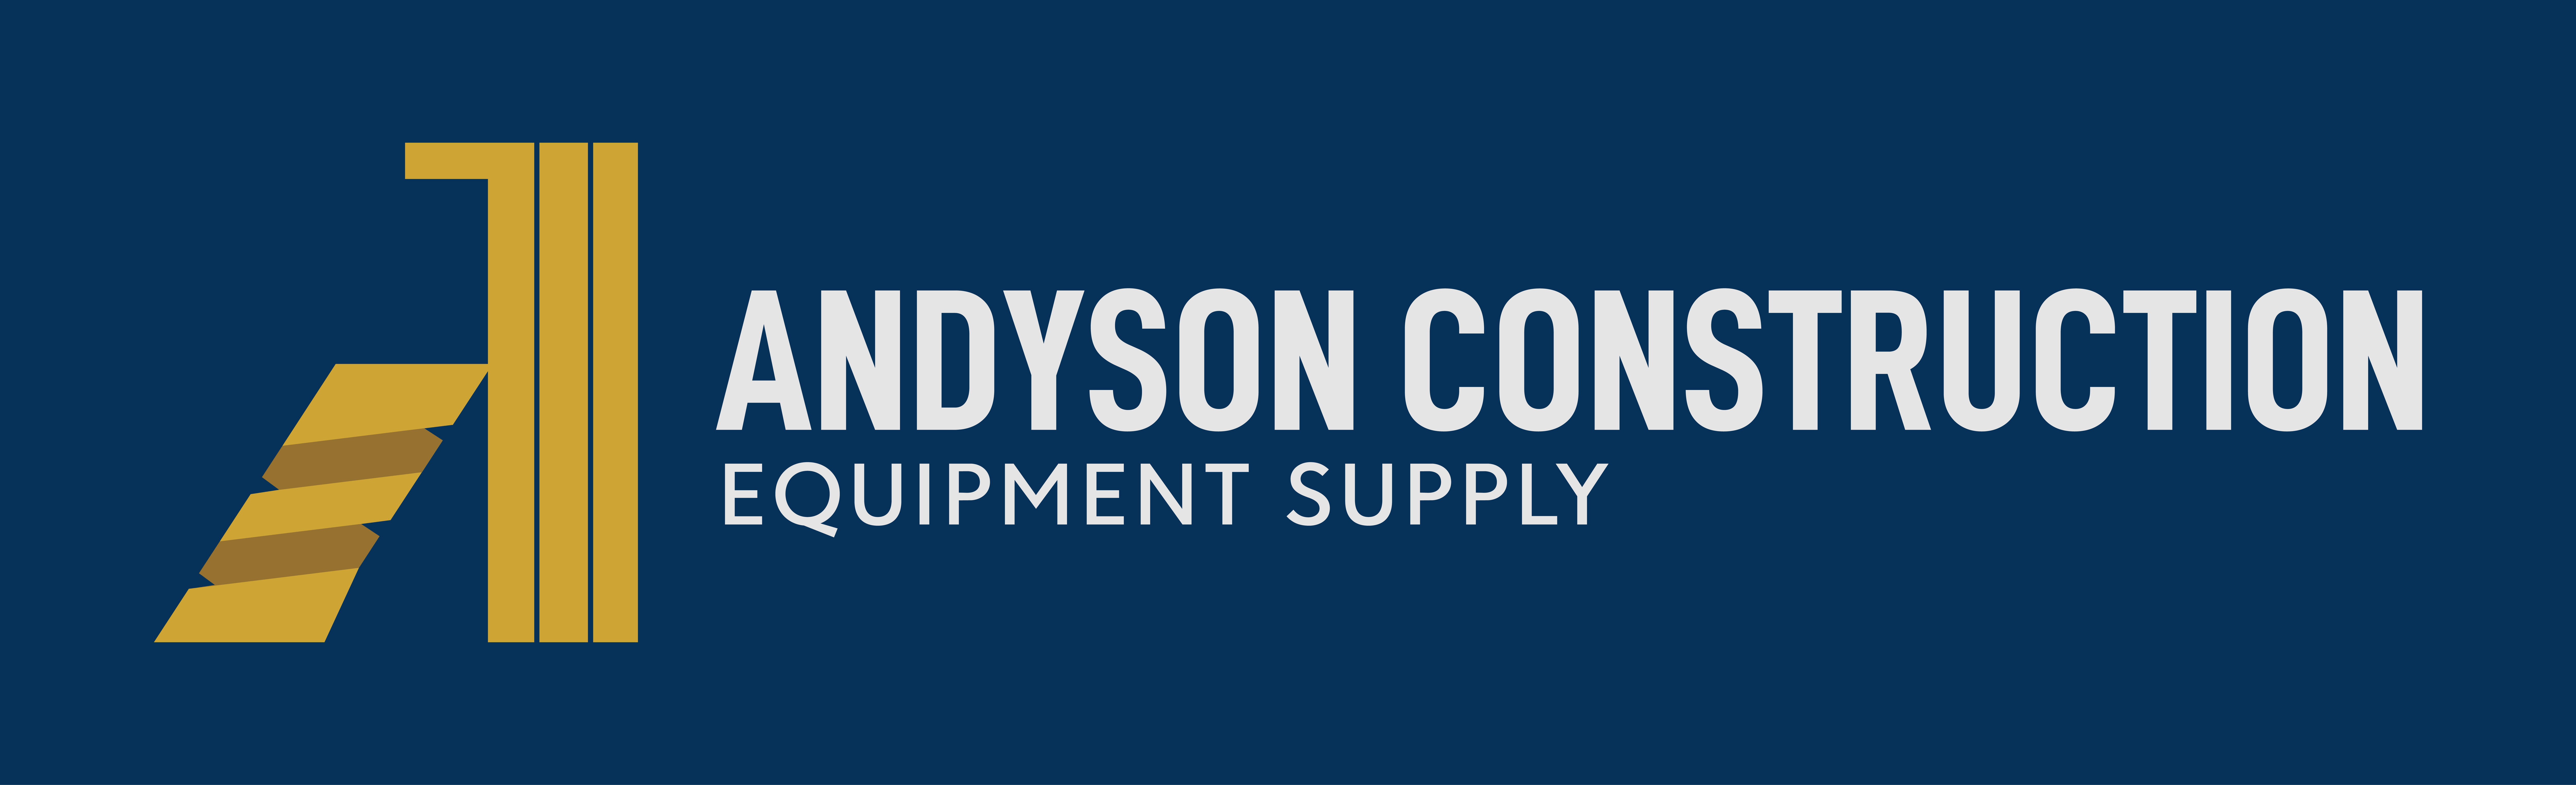 Andyson Construction Equipment Supply